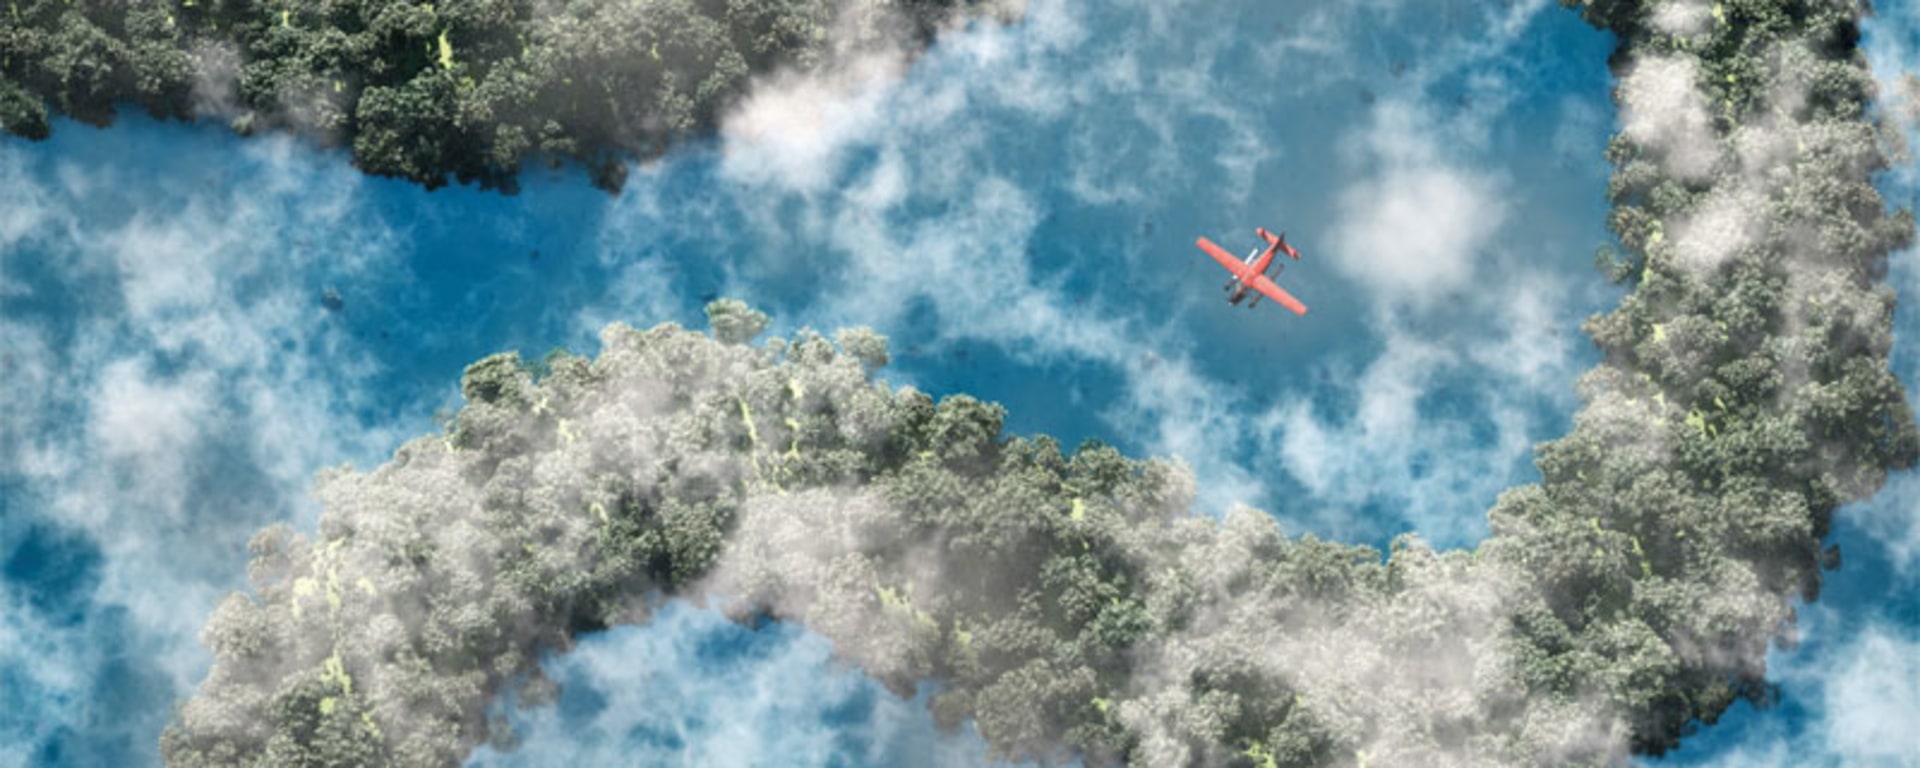 A plane soaring above a winding river and lush trees.